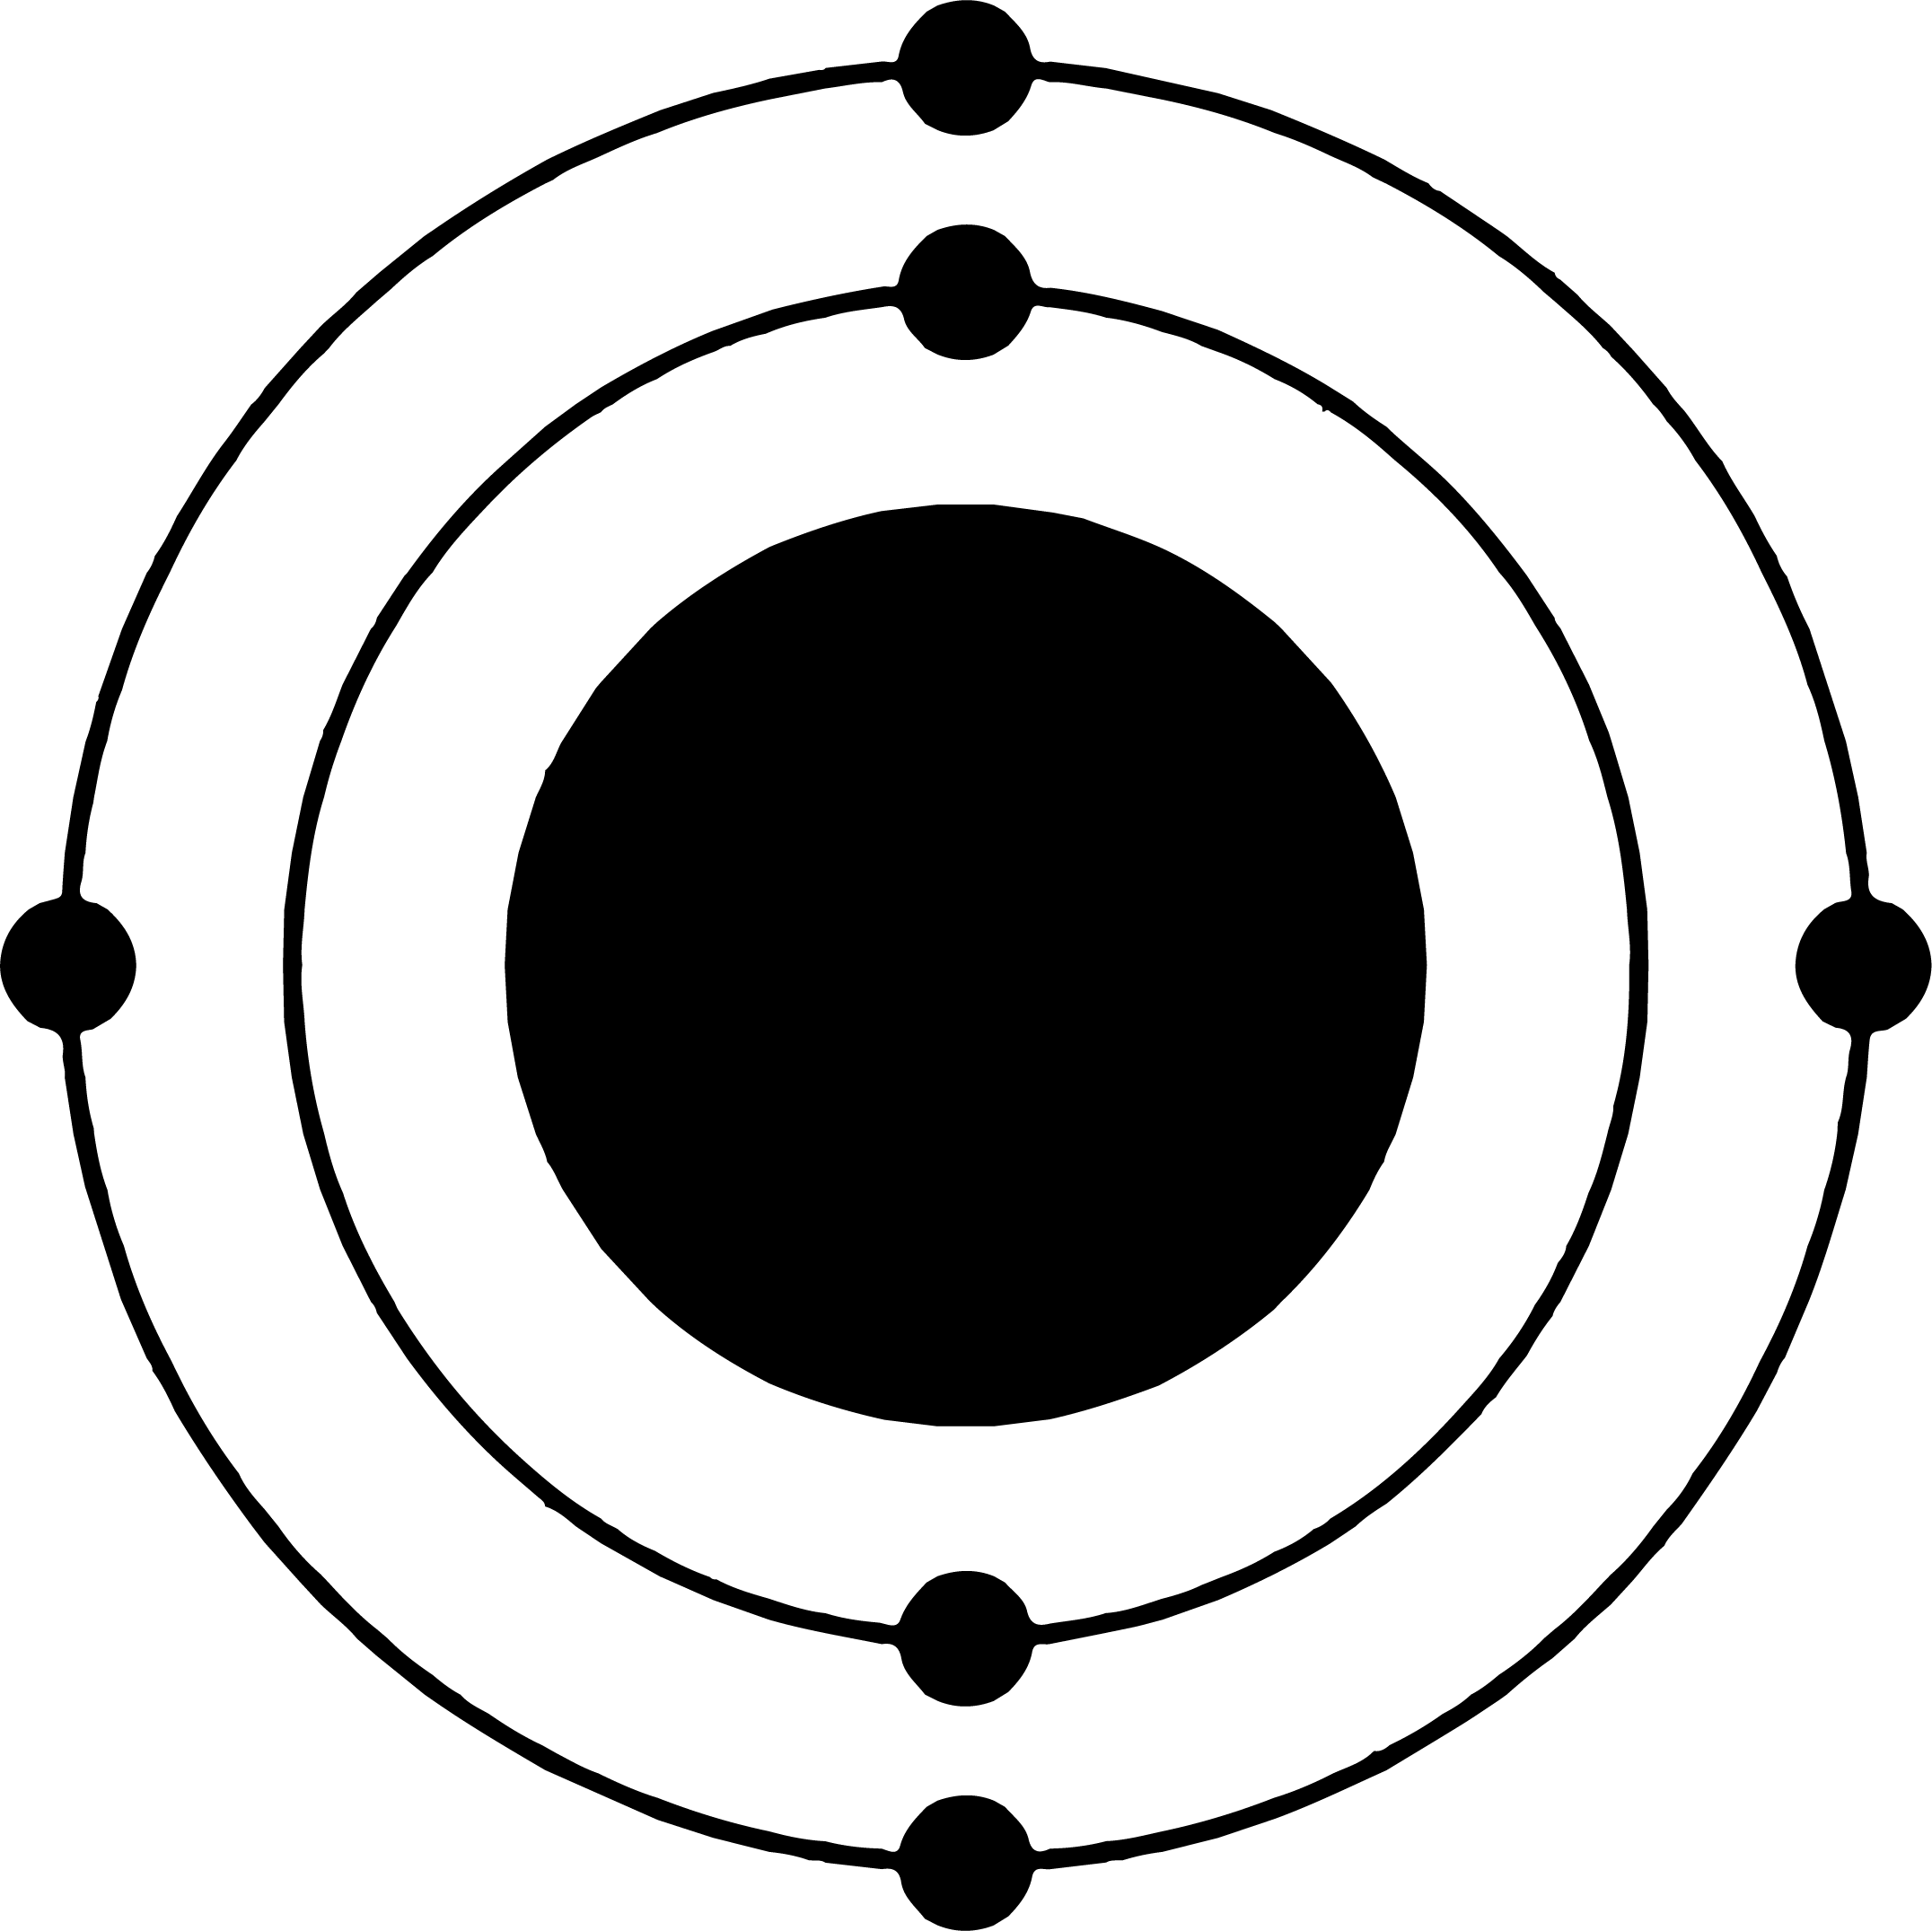 A drawing of a carbon atom represented as a large black circle on a white background surrounded by 2 thin black rings with 2 small black circles aligned vertically on the inner ring and 4 small black circles on the second ring. The small circles are evenly spaced on their rings.